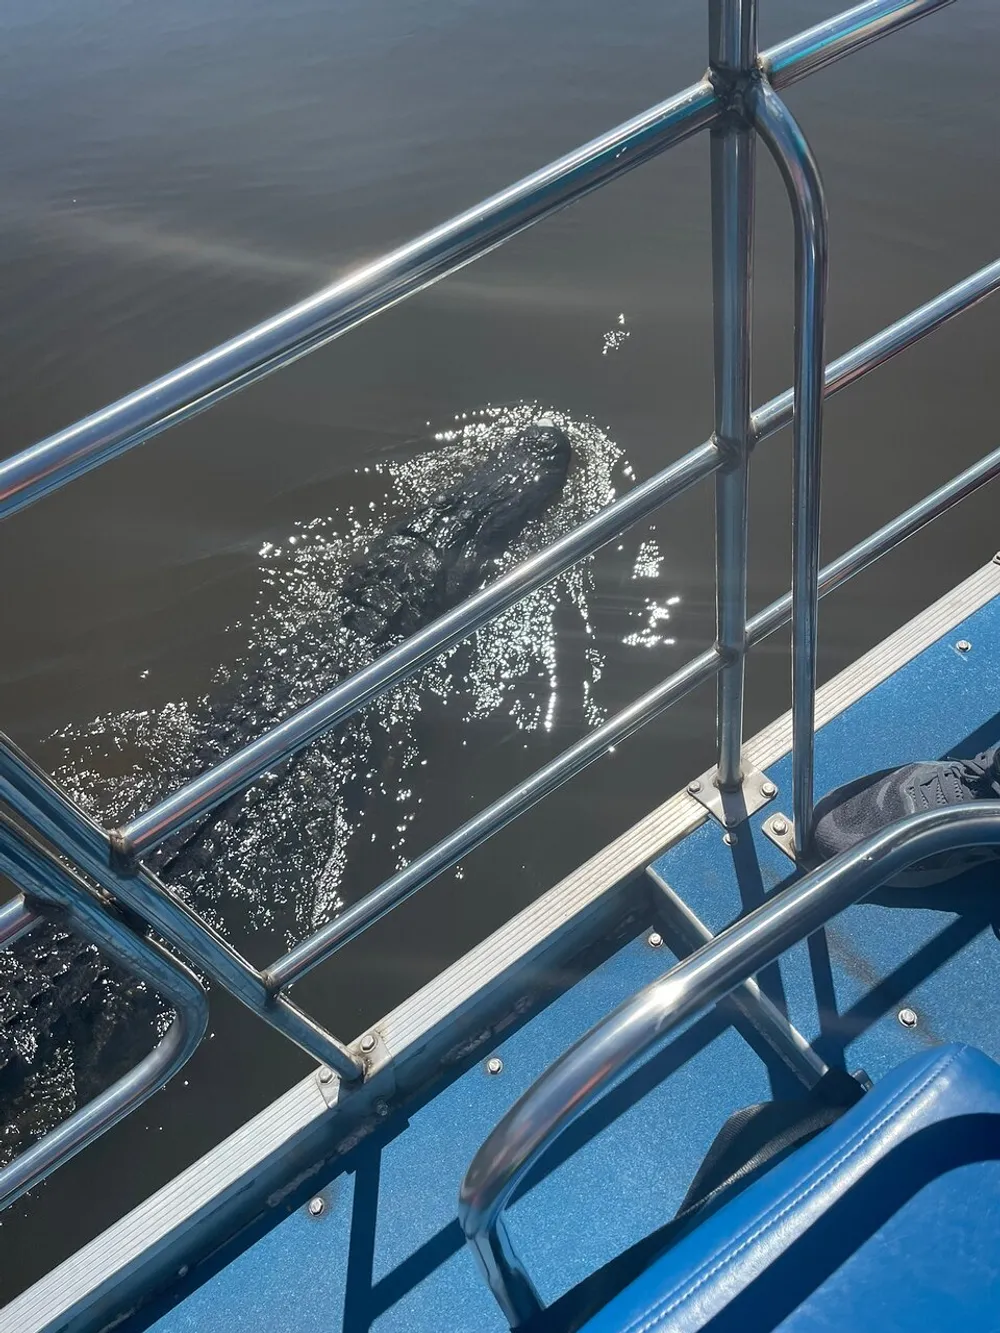 The image captures a close view of a large aquatic animal possibly a whale or dolphin emerging next to a boat with metal railings and blue seats indicating a whale-watching or marine sightseeing tour